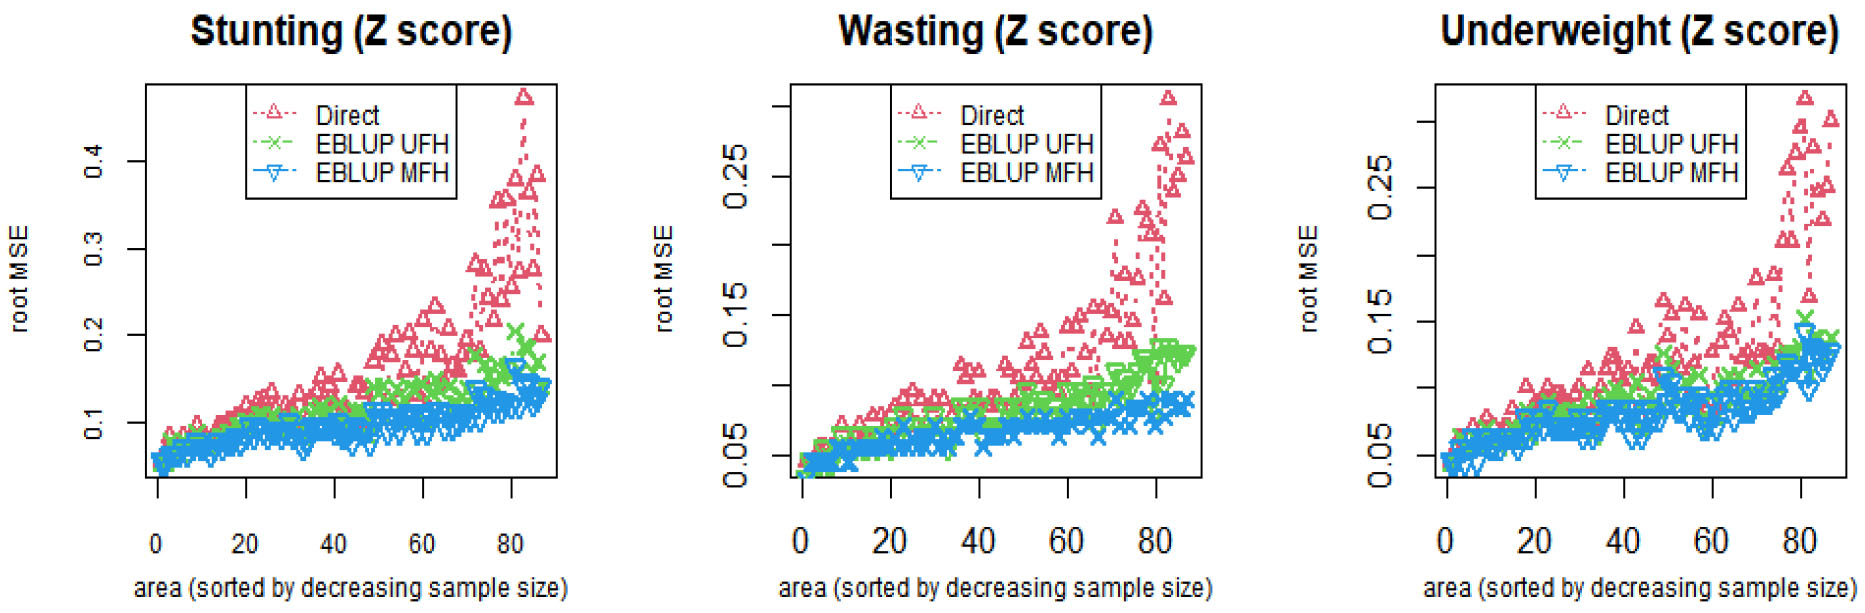 Zones (sorted by decreasing sample size) root MSE’s of direct, EBLUP UFH and EBLUP MFH model estimates of stunting, wasting and underweight for children under age five.